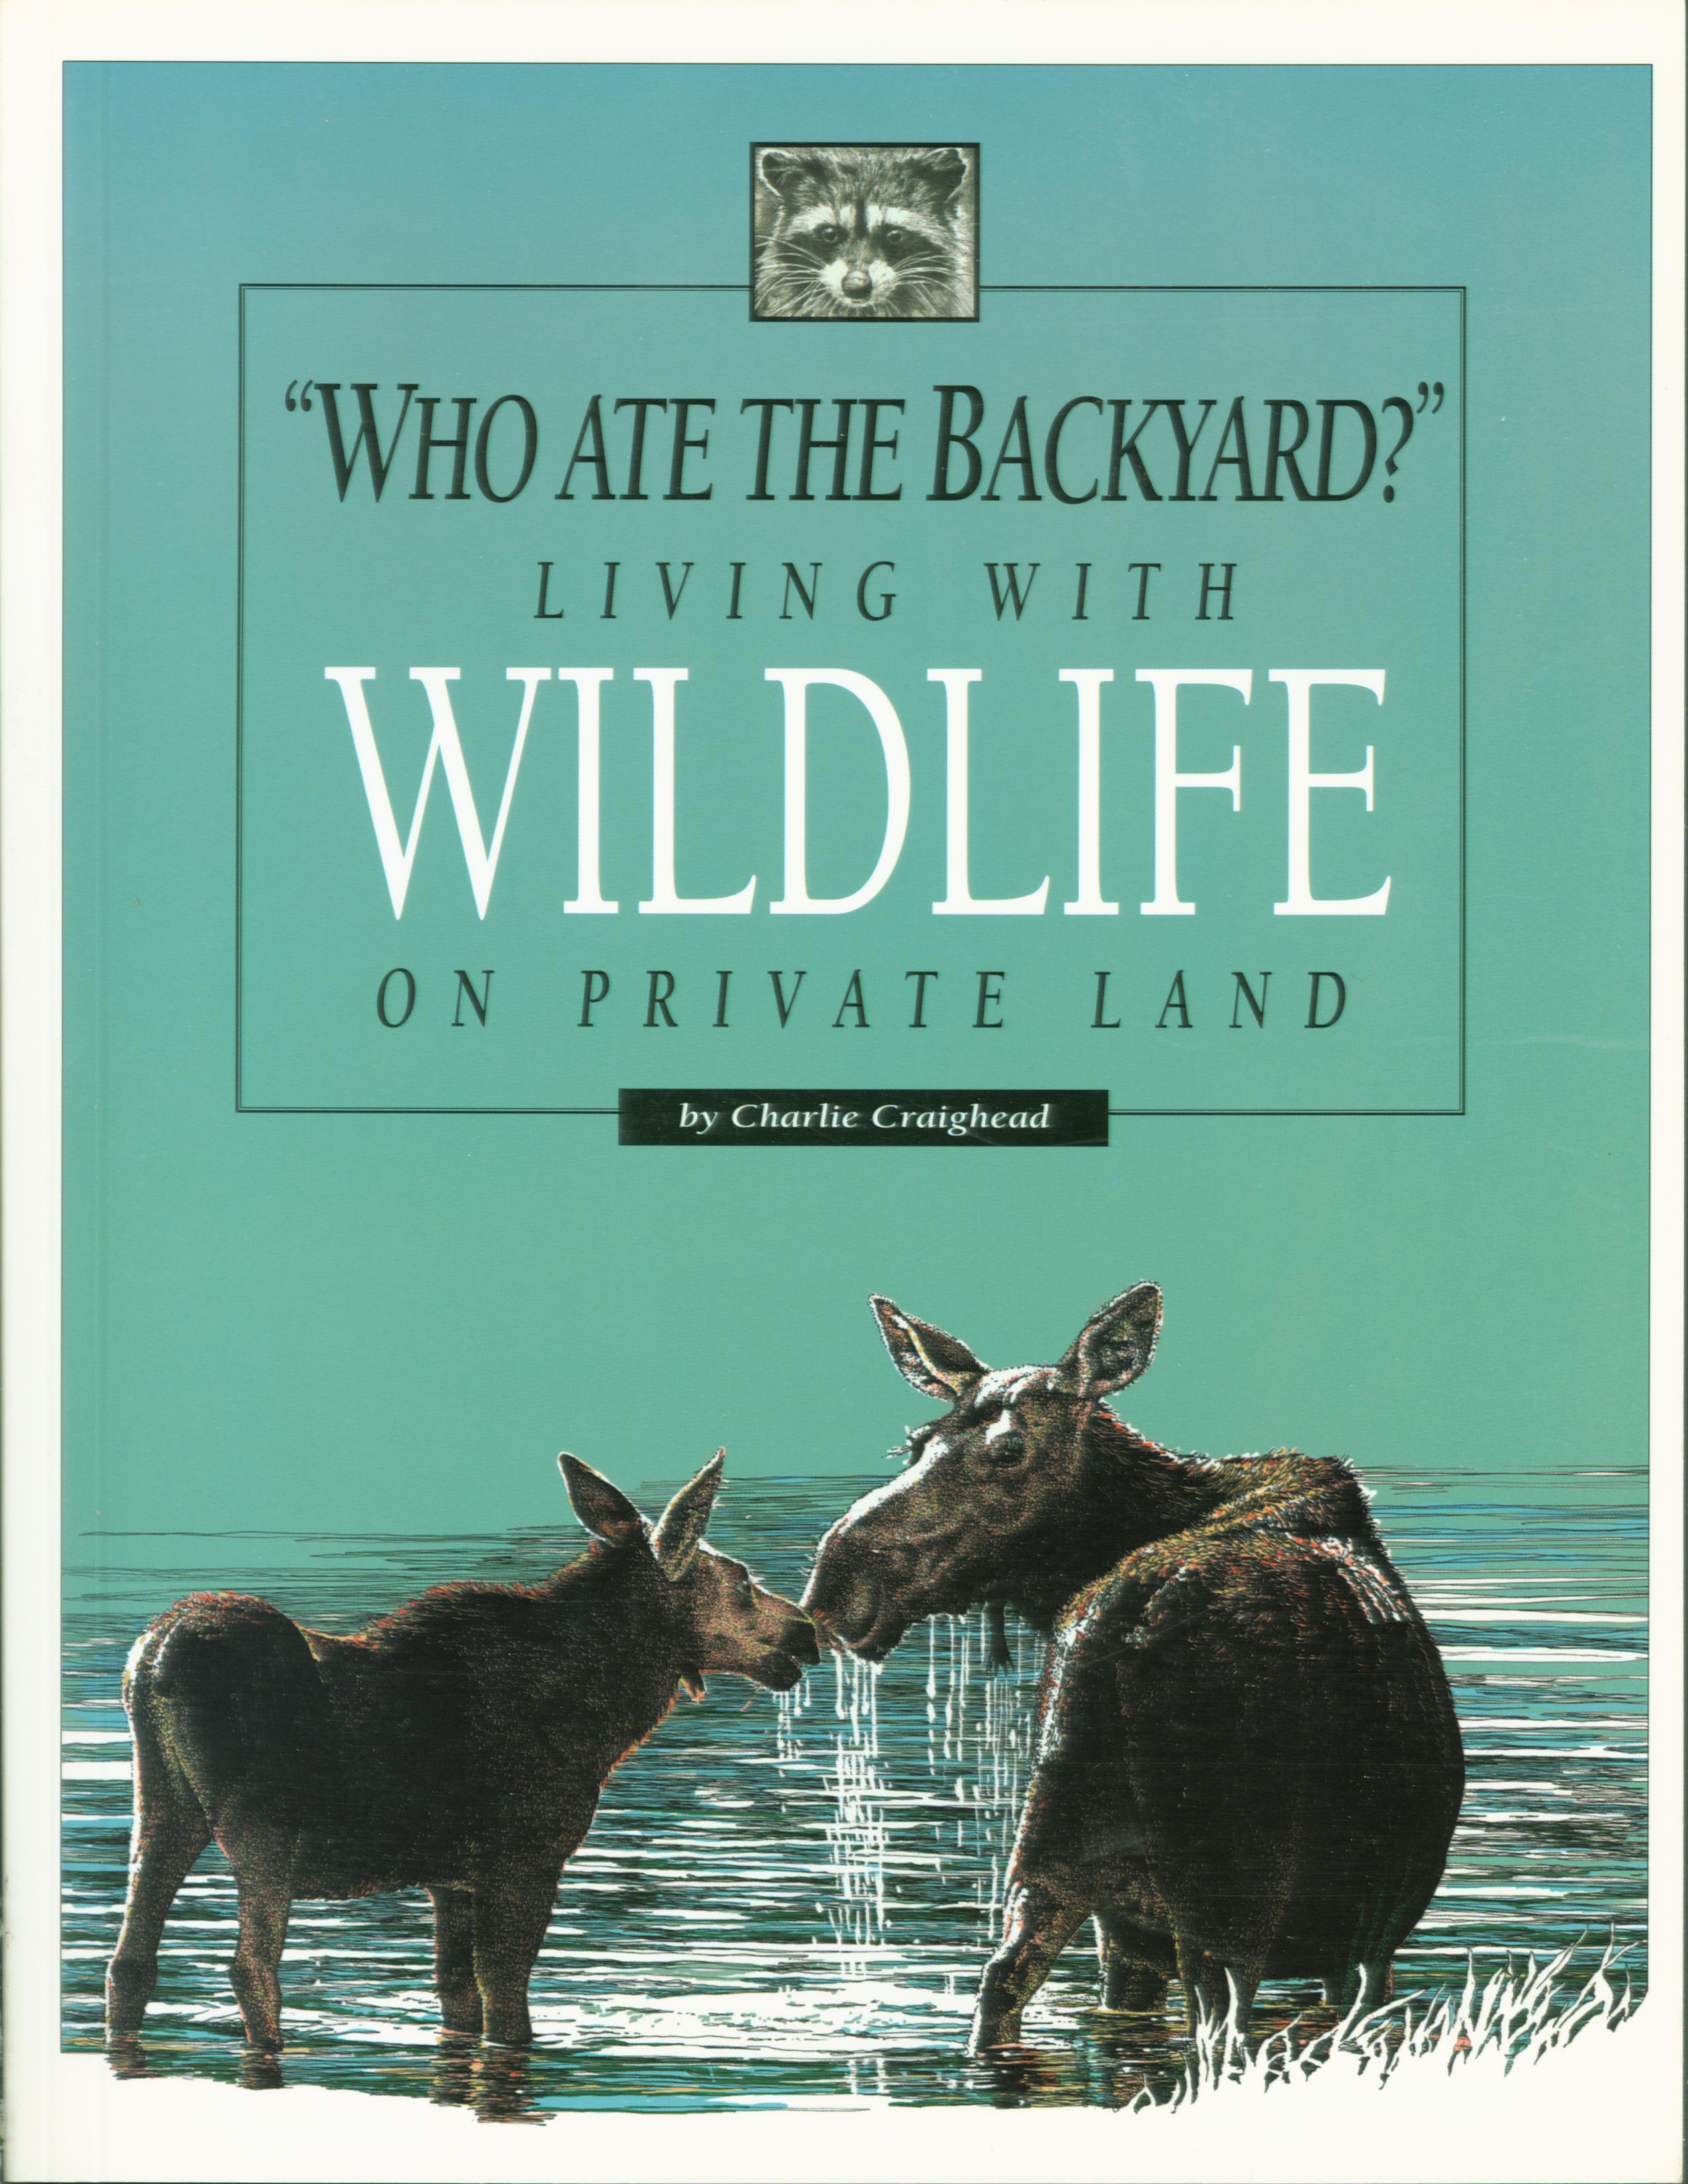 WHO ATE THE BACKYARD?: living with wildlife on private land.